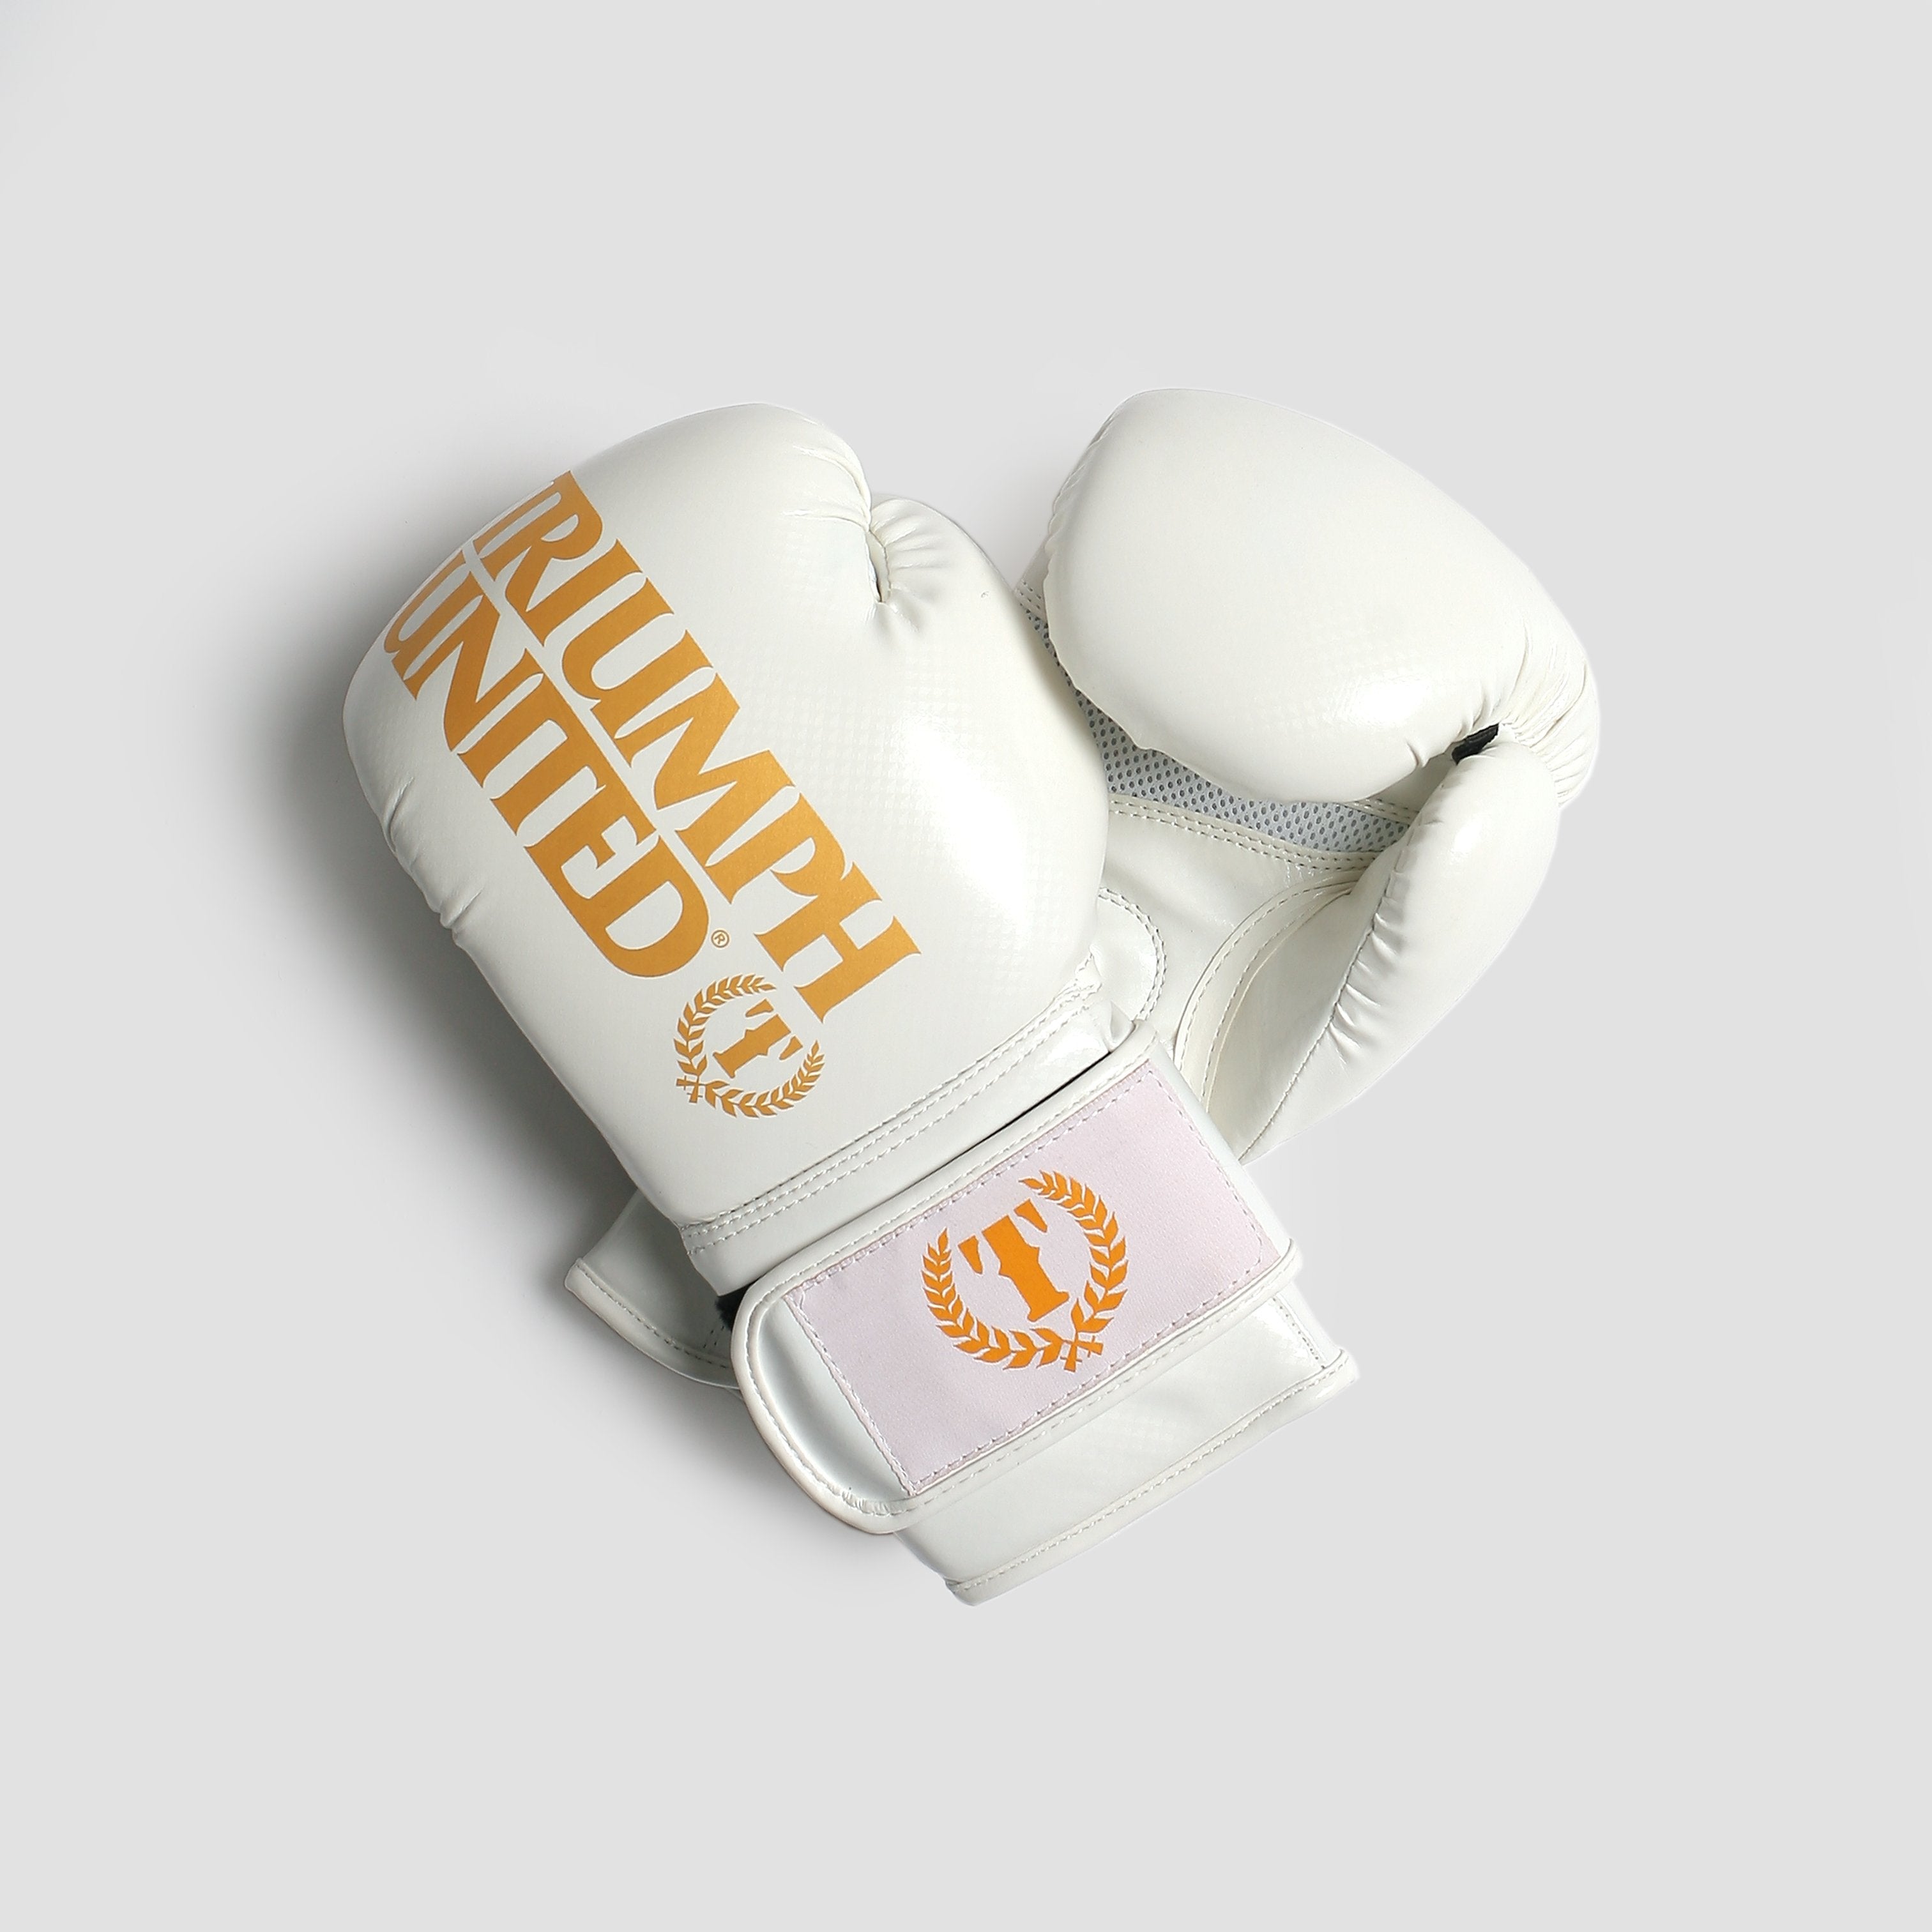 Triumph United Boxing Muy Thai Gloves in White and Gold